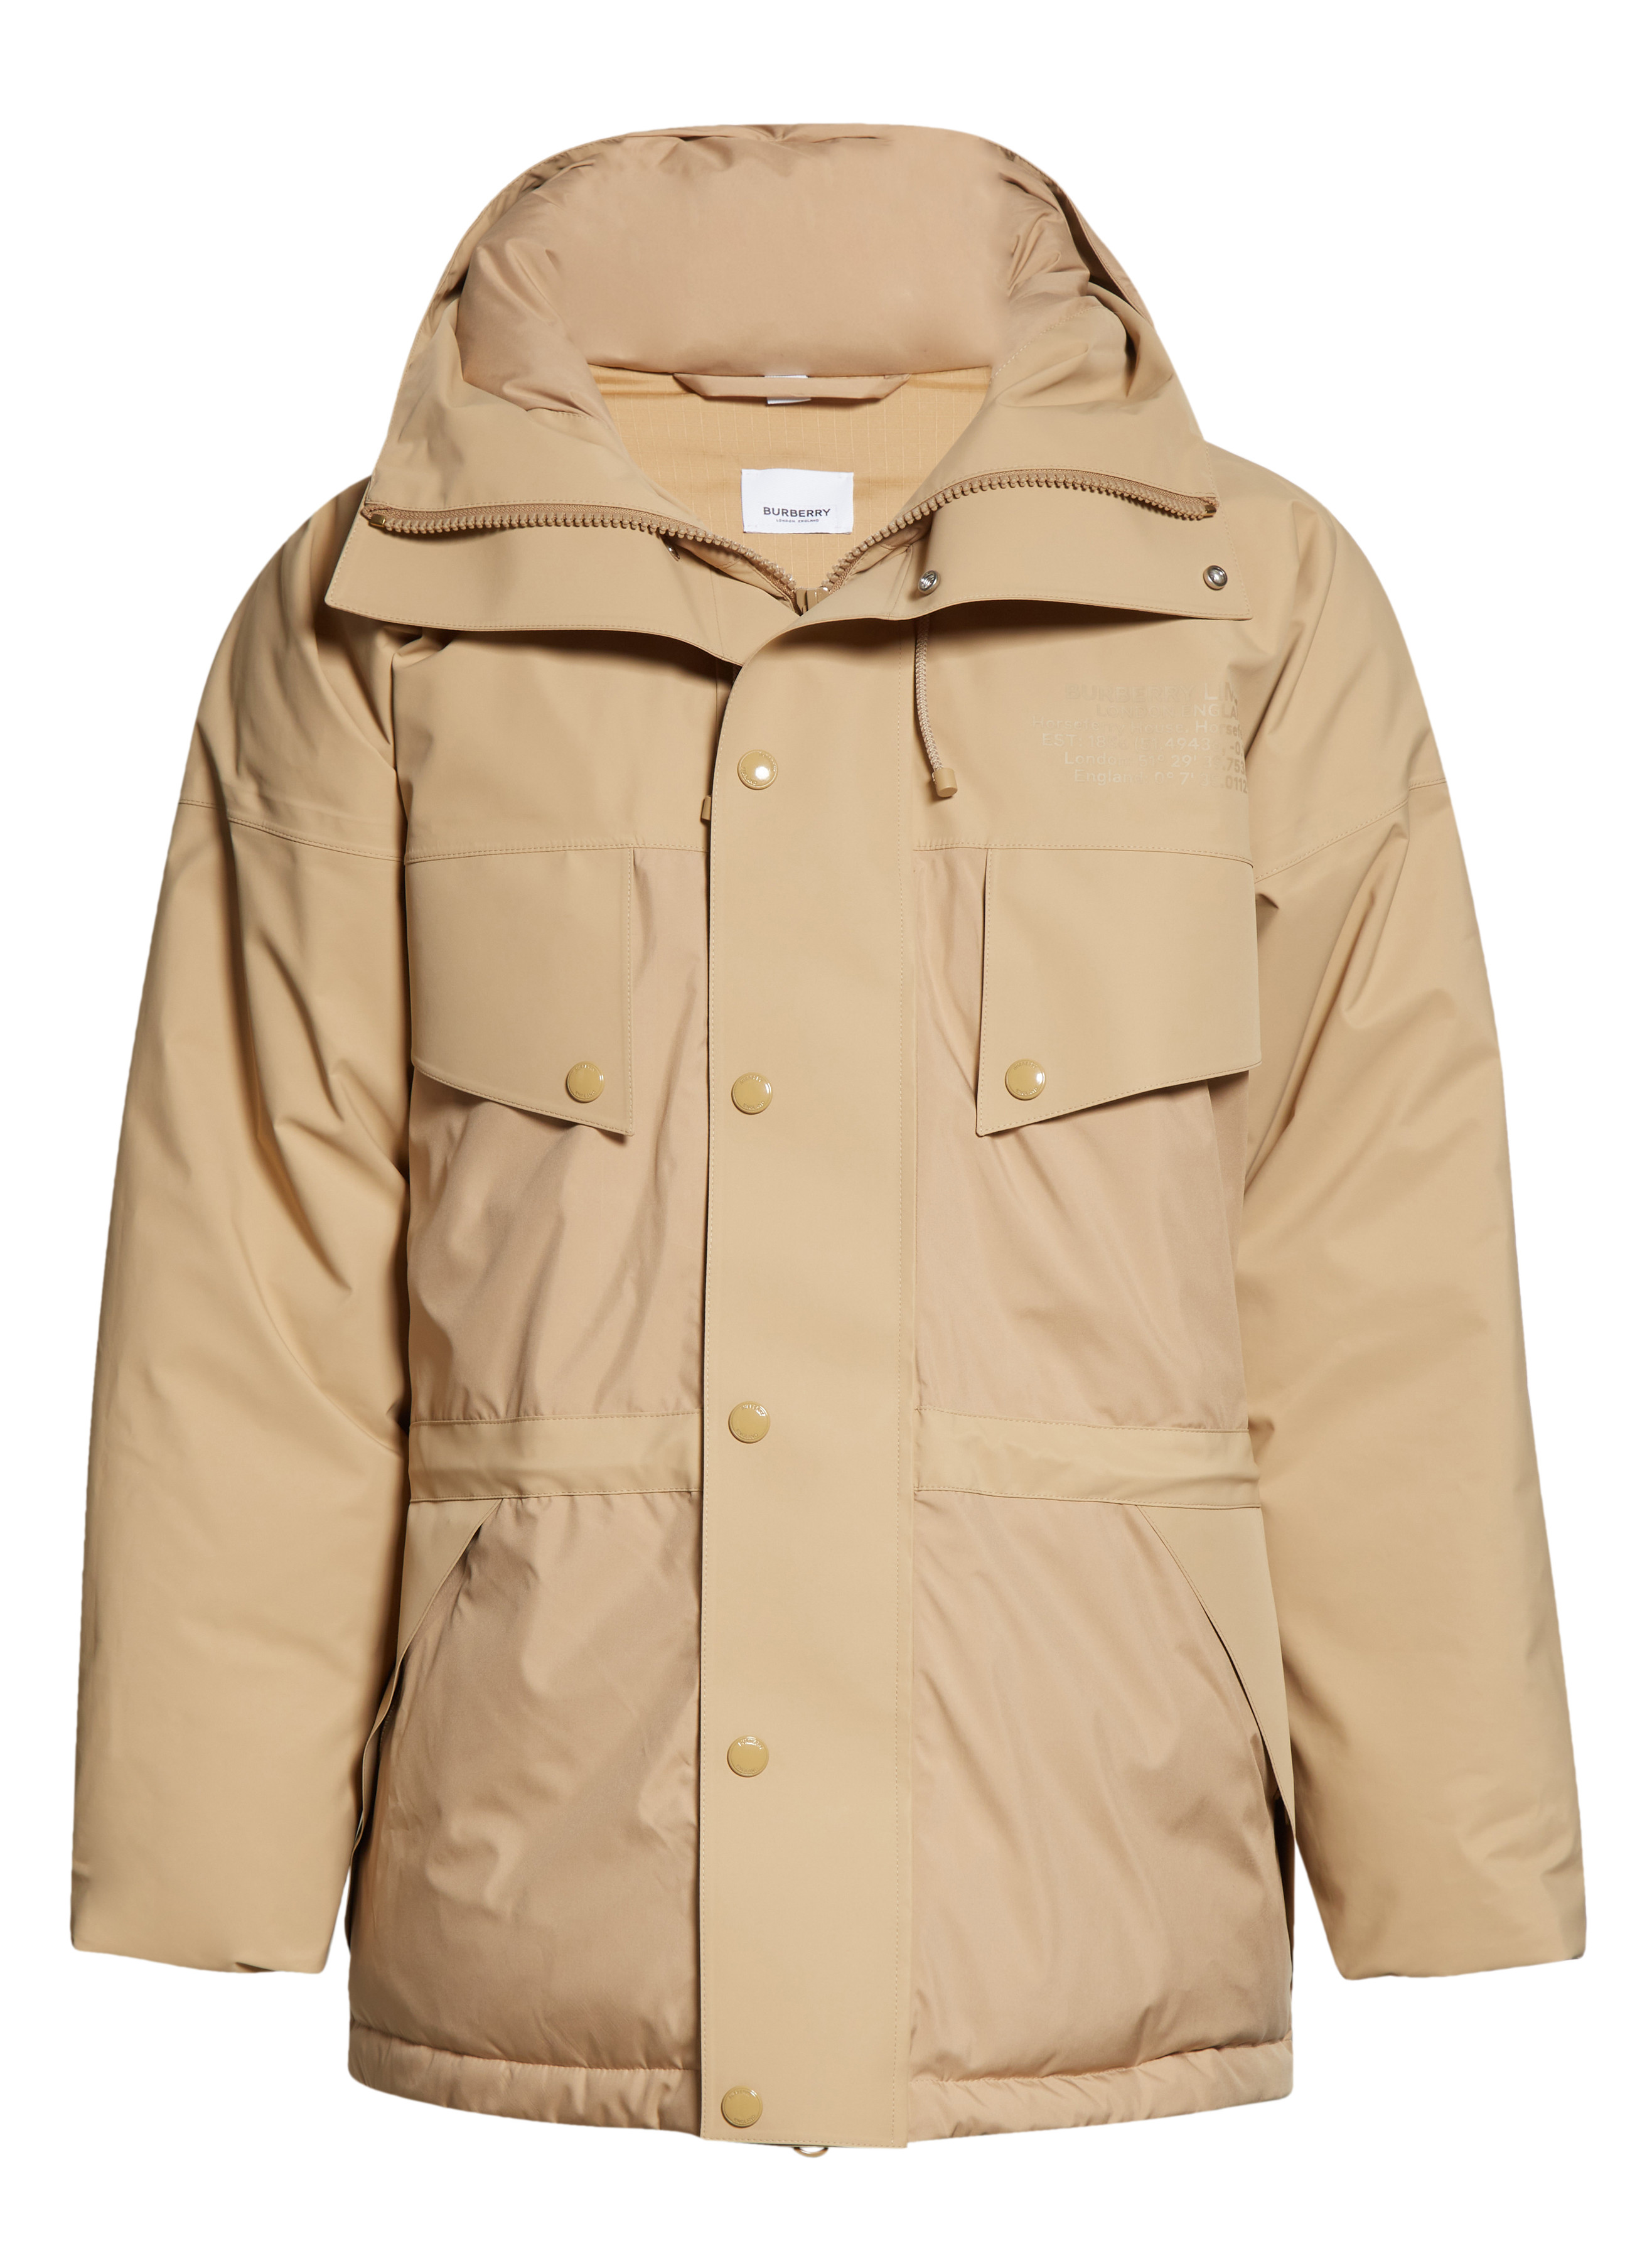 Nordstrom Exclusive Burberry Capsule Collection